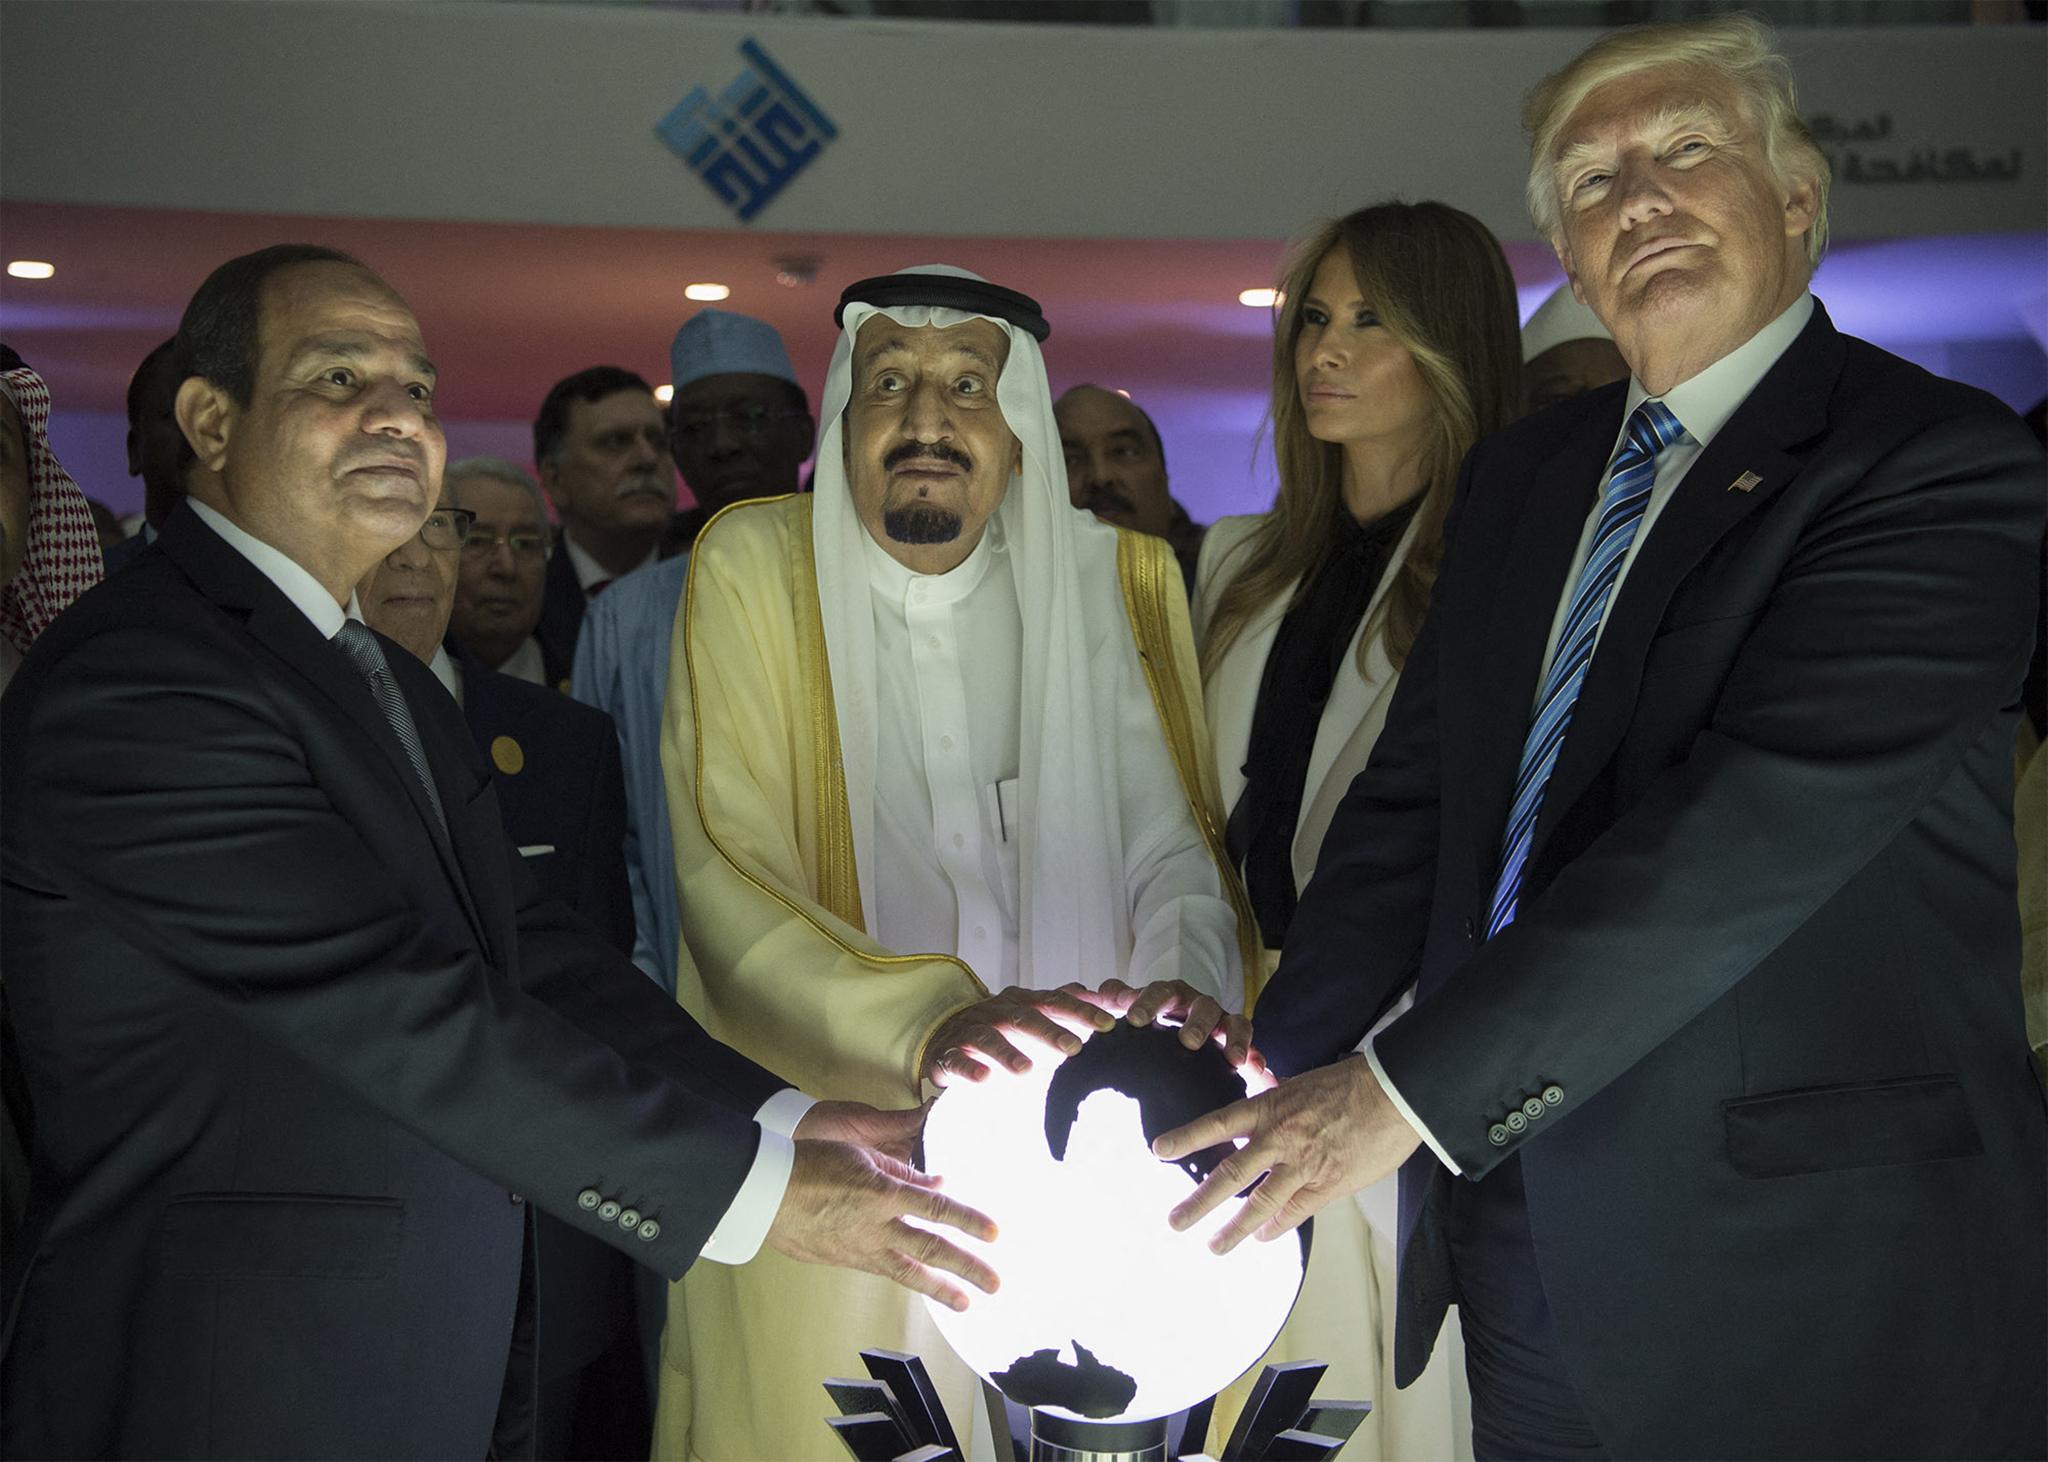 US President Donald Trump poses for a picture with Egyptian President Abdel Fattah el-Sisi and Saudi King Salman bin Abdulaziz during Trump's visit to Riyadh in 2017.